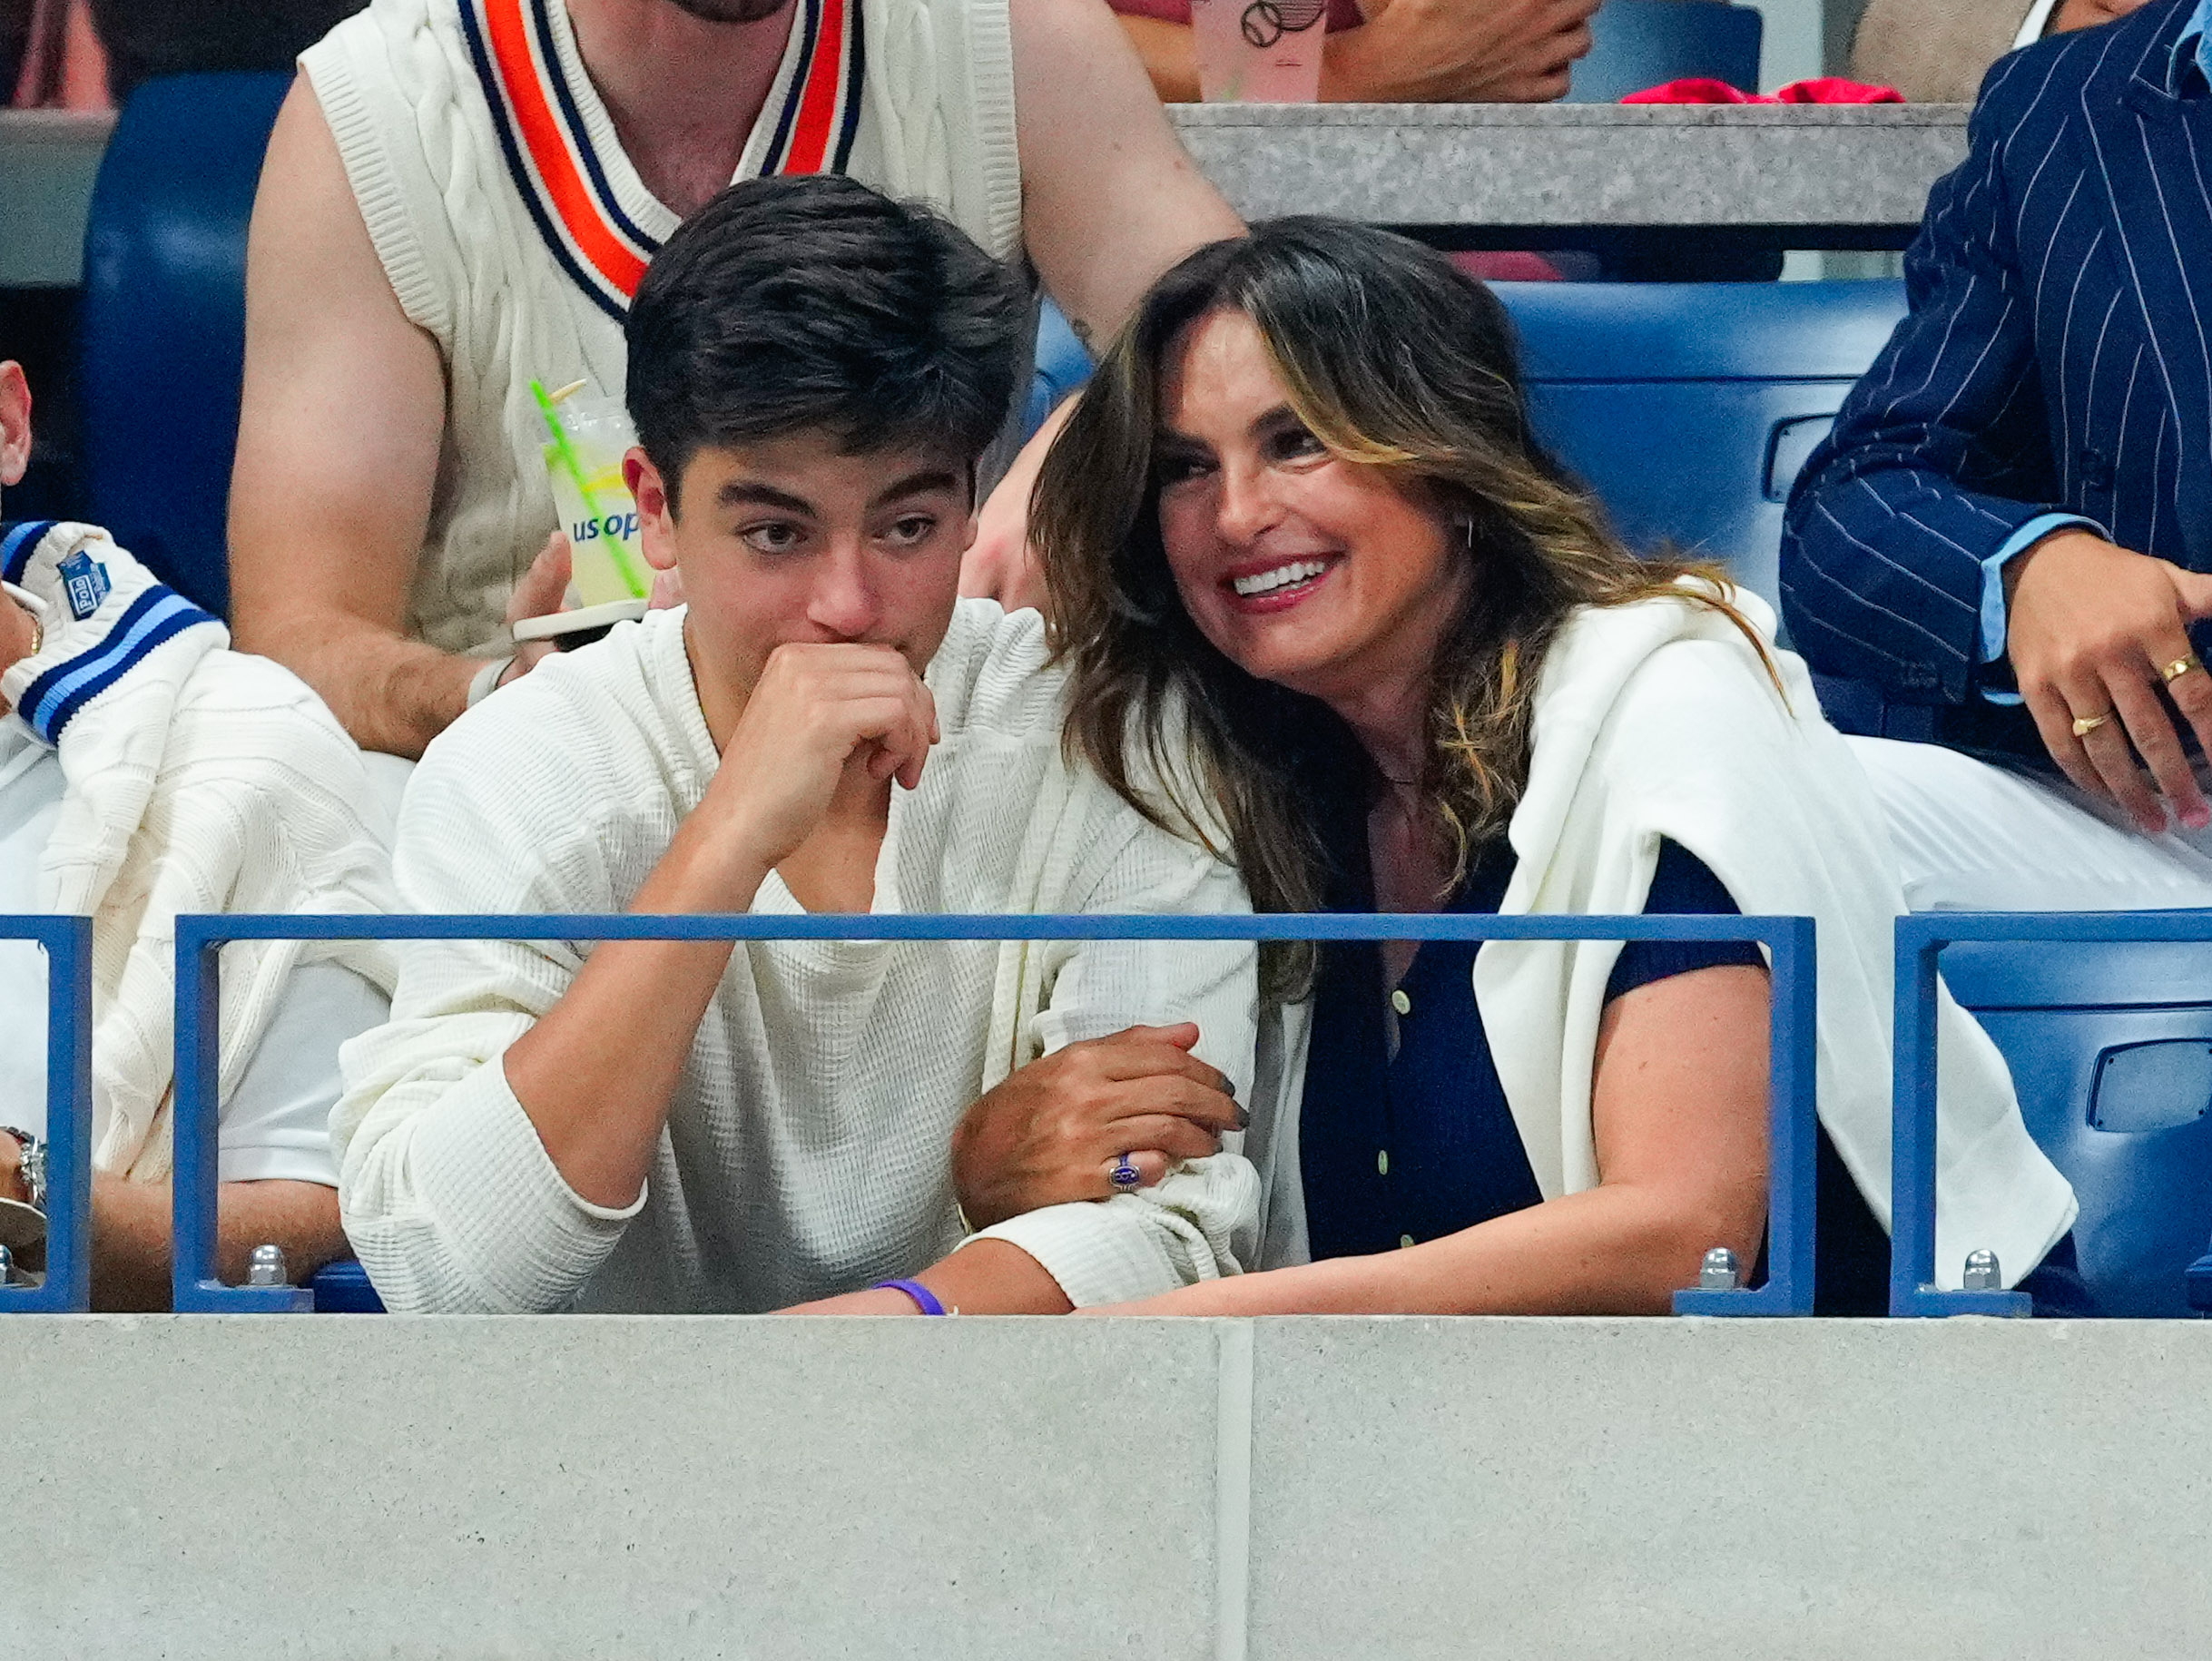 August Hermann and Mariska Hargitay at the US Open Tennis Championships on September 08, 2023 in New York. | Source: Getty Images